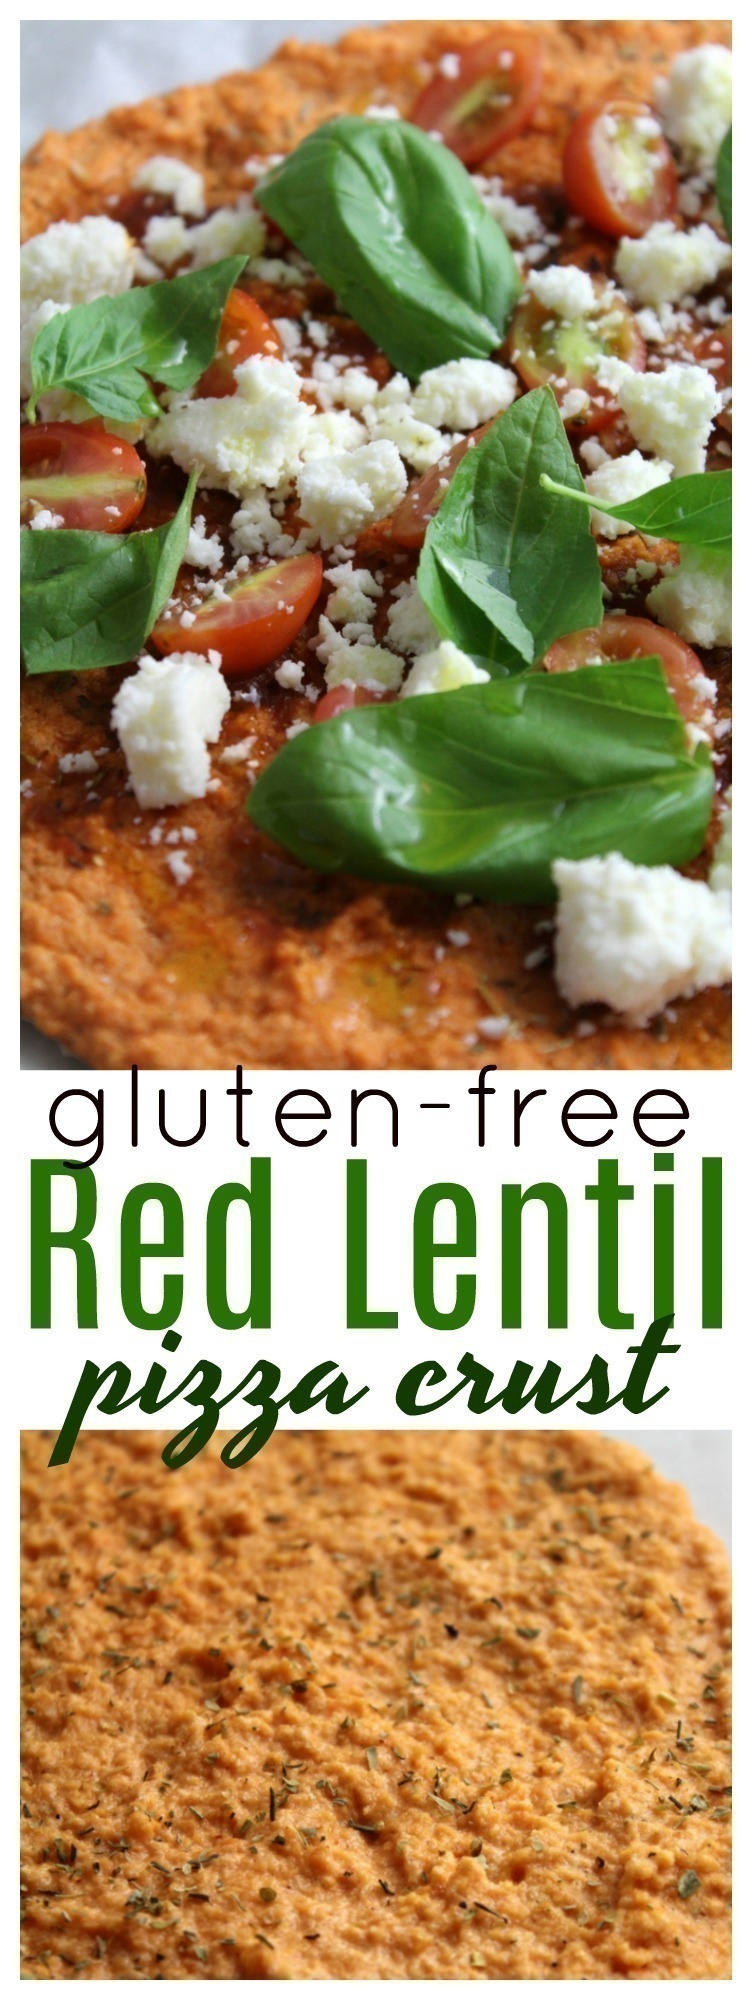 This Red Lentil Pizza Crust is super easy to whip up, gluten-free and great for a meatless meal. It pairs up super with homemade marinara sauce, and fresh cheese. Yum!